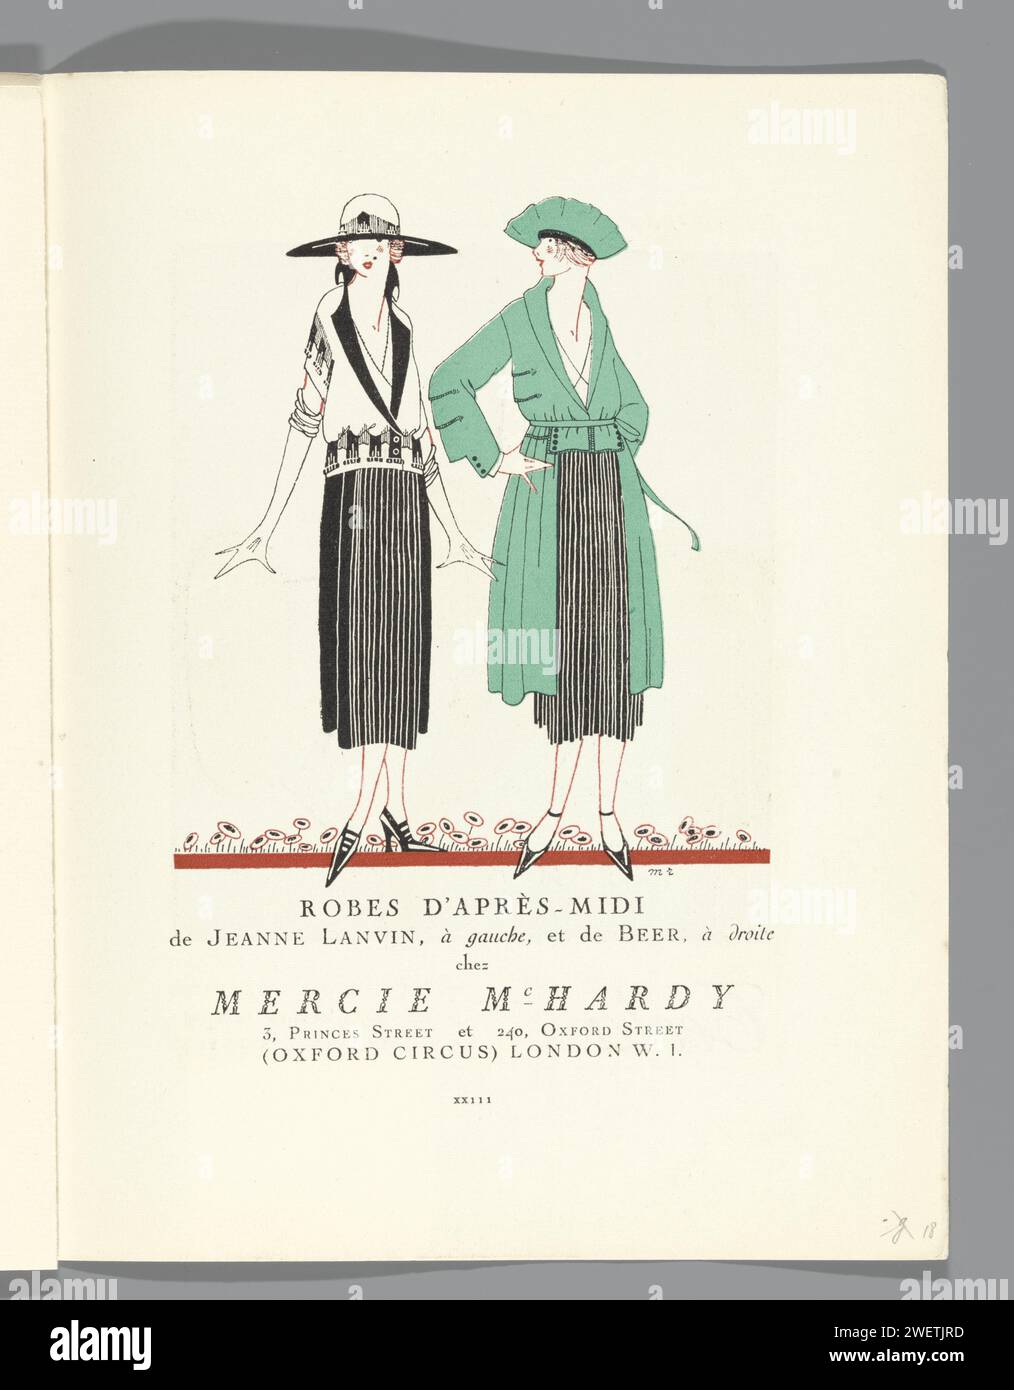 GAZETTE DU BON TON, 1920 - No. 3, p. XXIII: afternoon dresses by Lanvin and Beer, 1920  Advertisement by Mercie Mchardy, Oxford Street, London: Left a dress from Jeanne Lanvin, on the right a dress and cloak from Beer.  paper  fashion plates. dress, gown (AFTERNOON DRESS) (+ women's clothes) Stock Photo